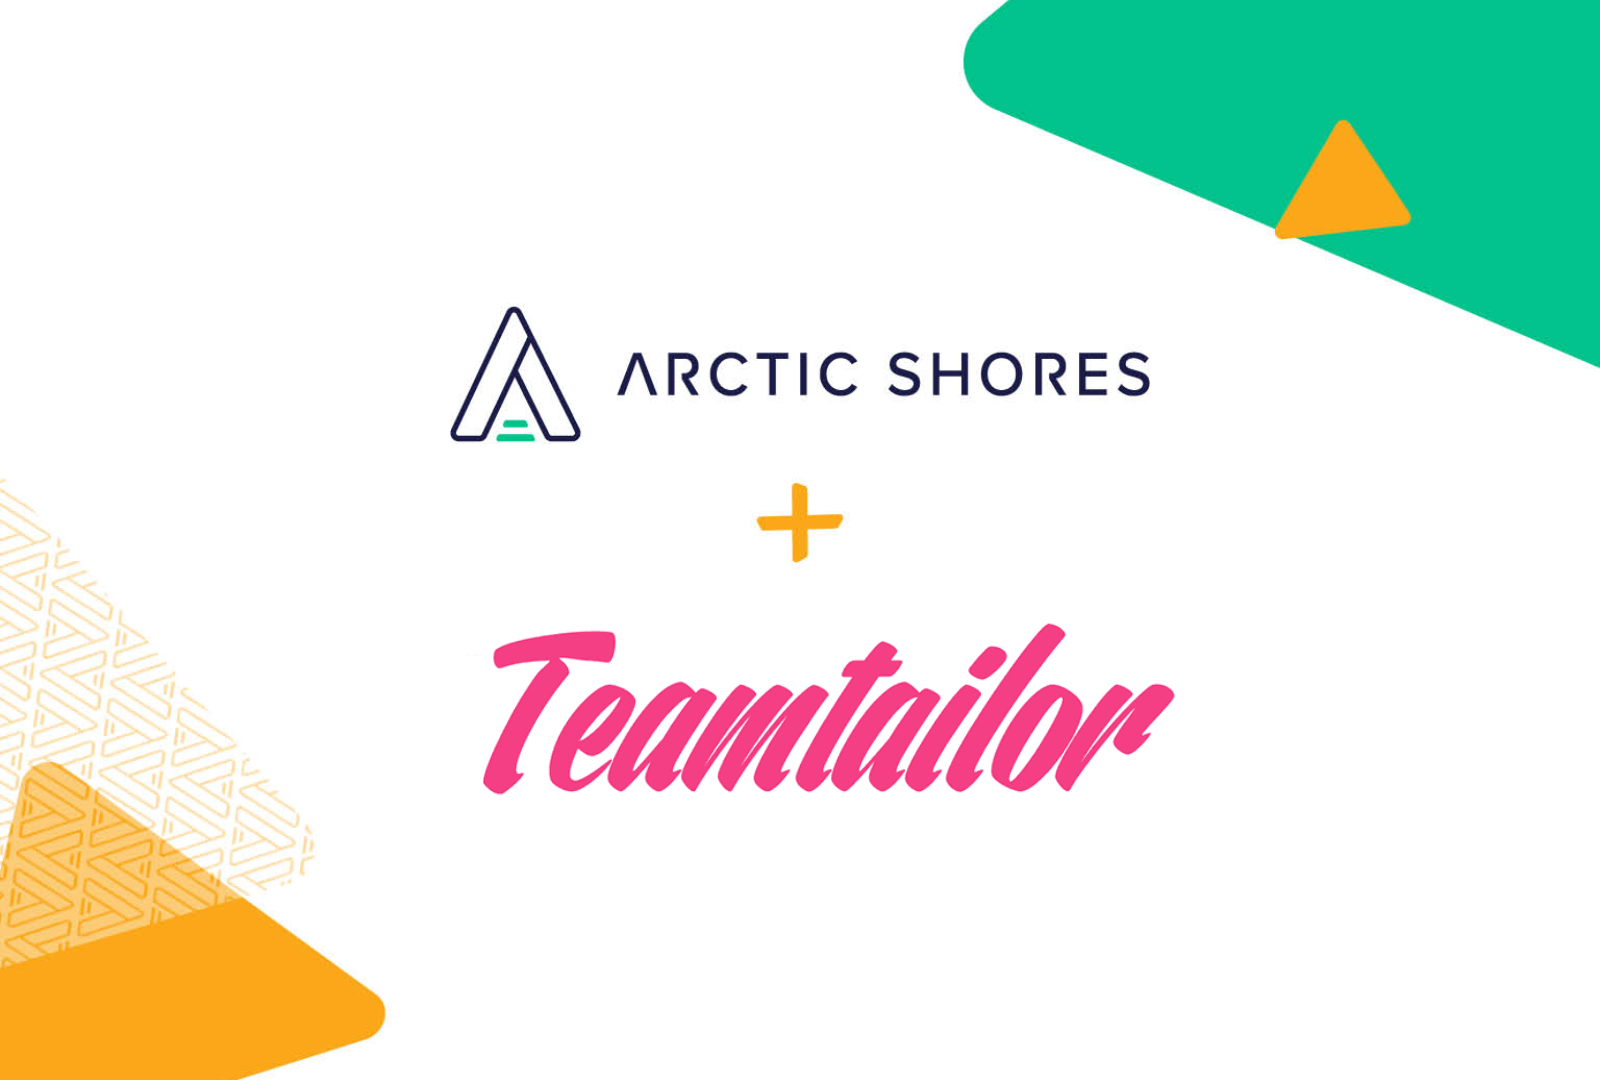 Arctic Shores partners with Teamtailor to redefine candidate experience and help businesses scrap the CV